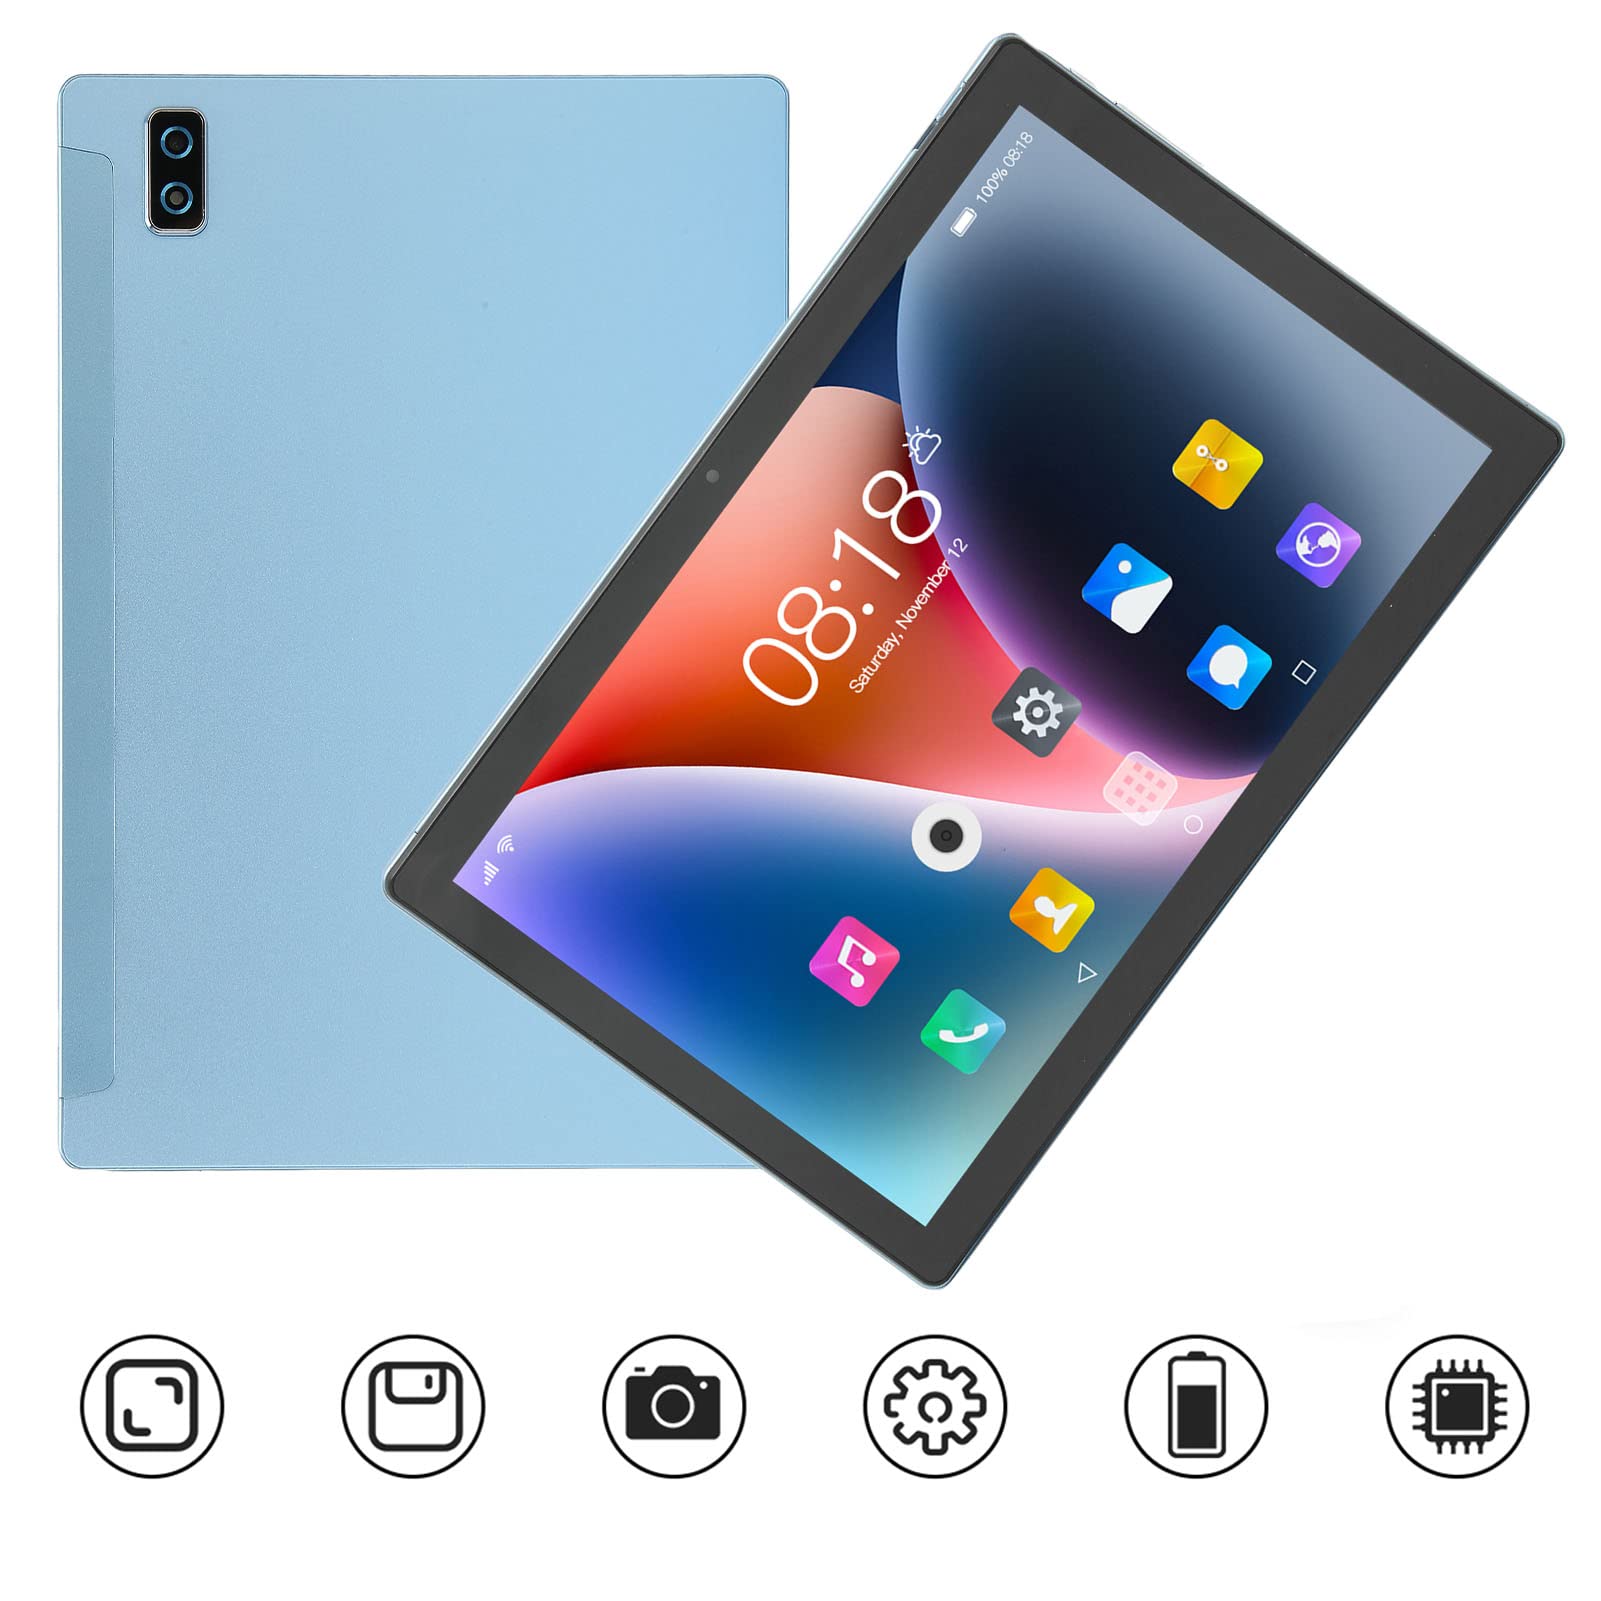 KUIDAMOS 5G WiFi Tablet, Octa Core CPU 4G Calling FHD 10.1 Inch Tablet Dual Cameras for Work (Blue)